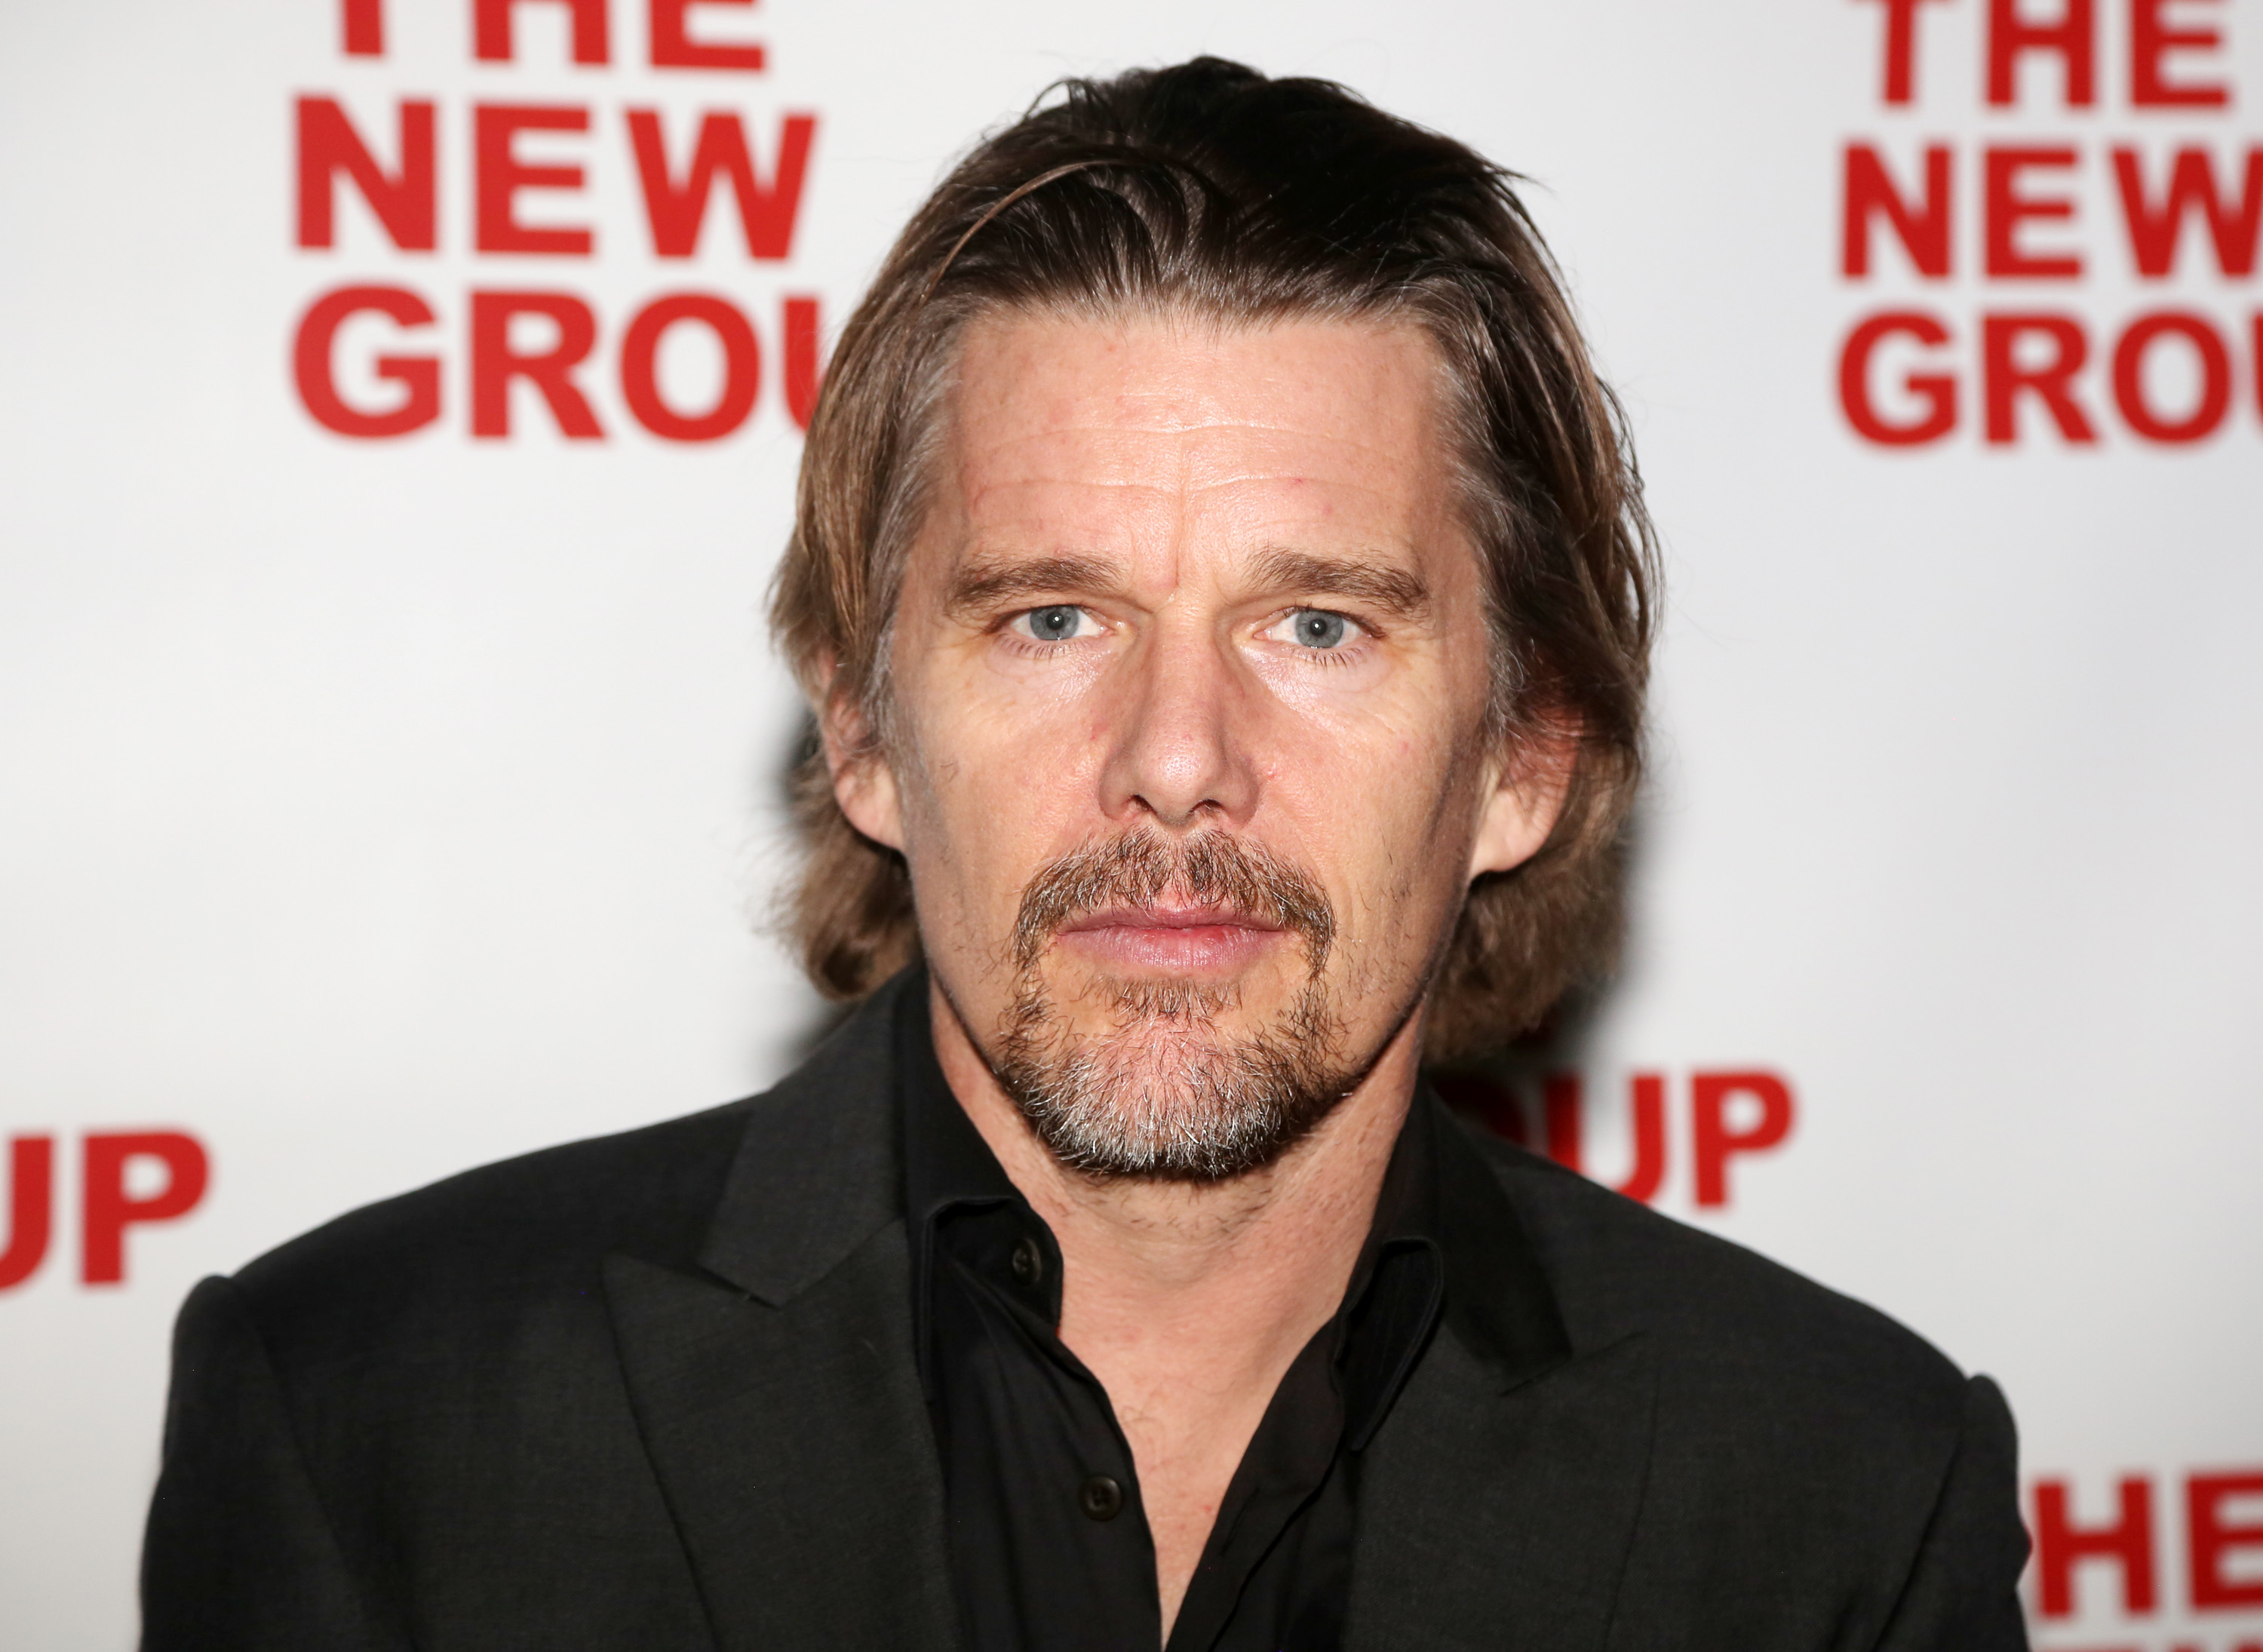 'Moon Knight' actor Ethan Hawke wears a black suit jacket over a black button-up shirt.